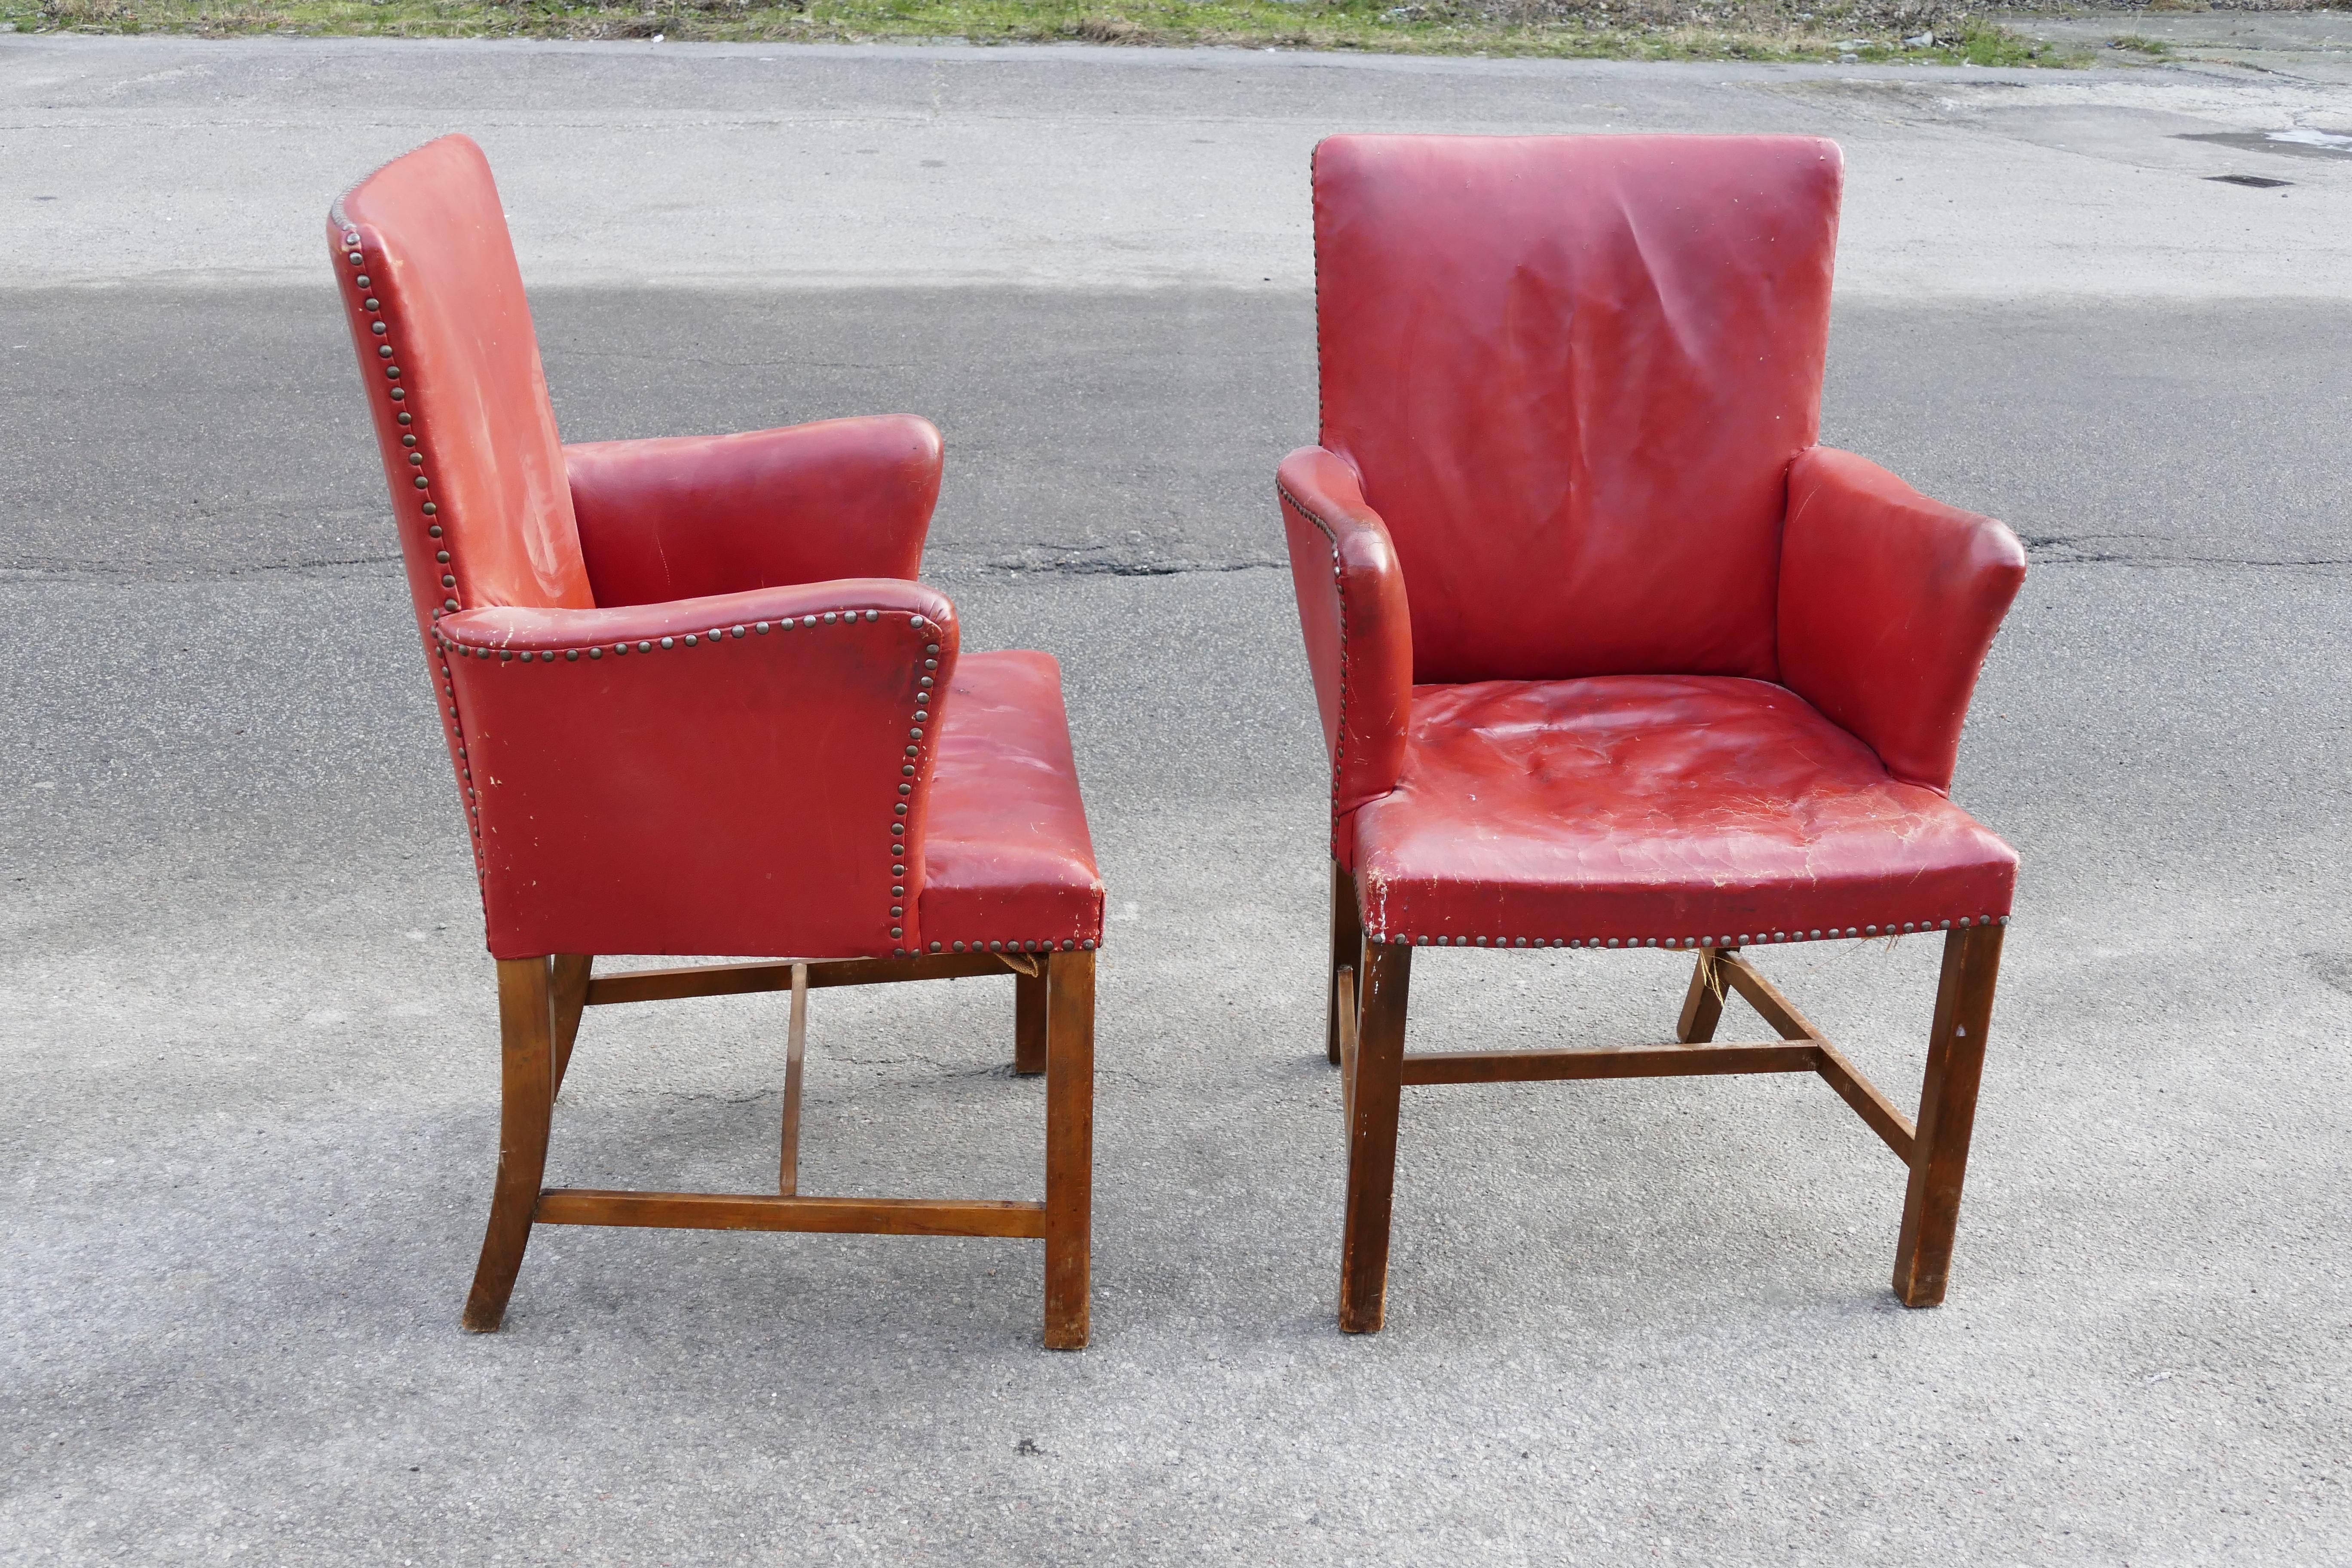 Mid-20th Century Pair of Danish armchairs from the 1930s in the style of Kaare Klint